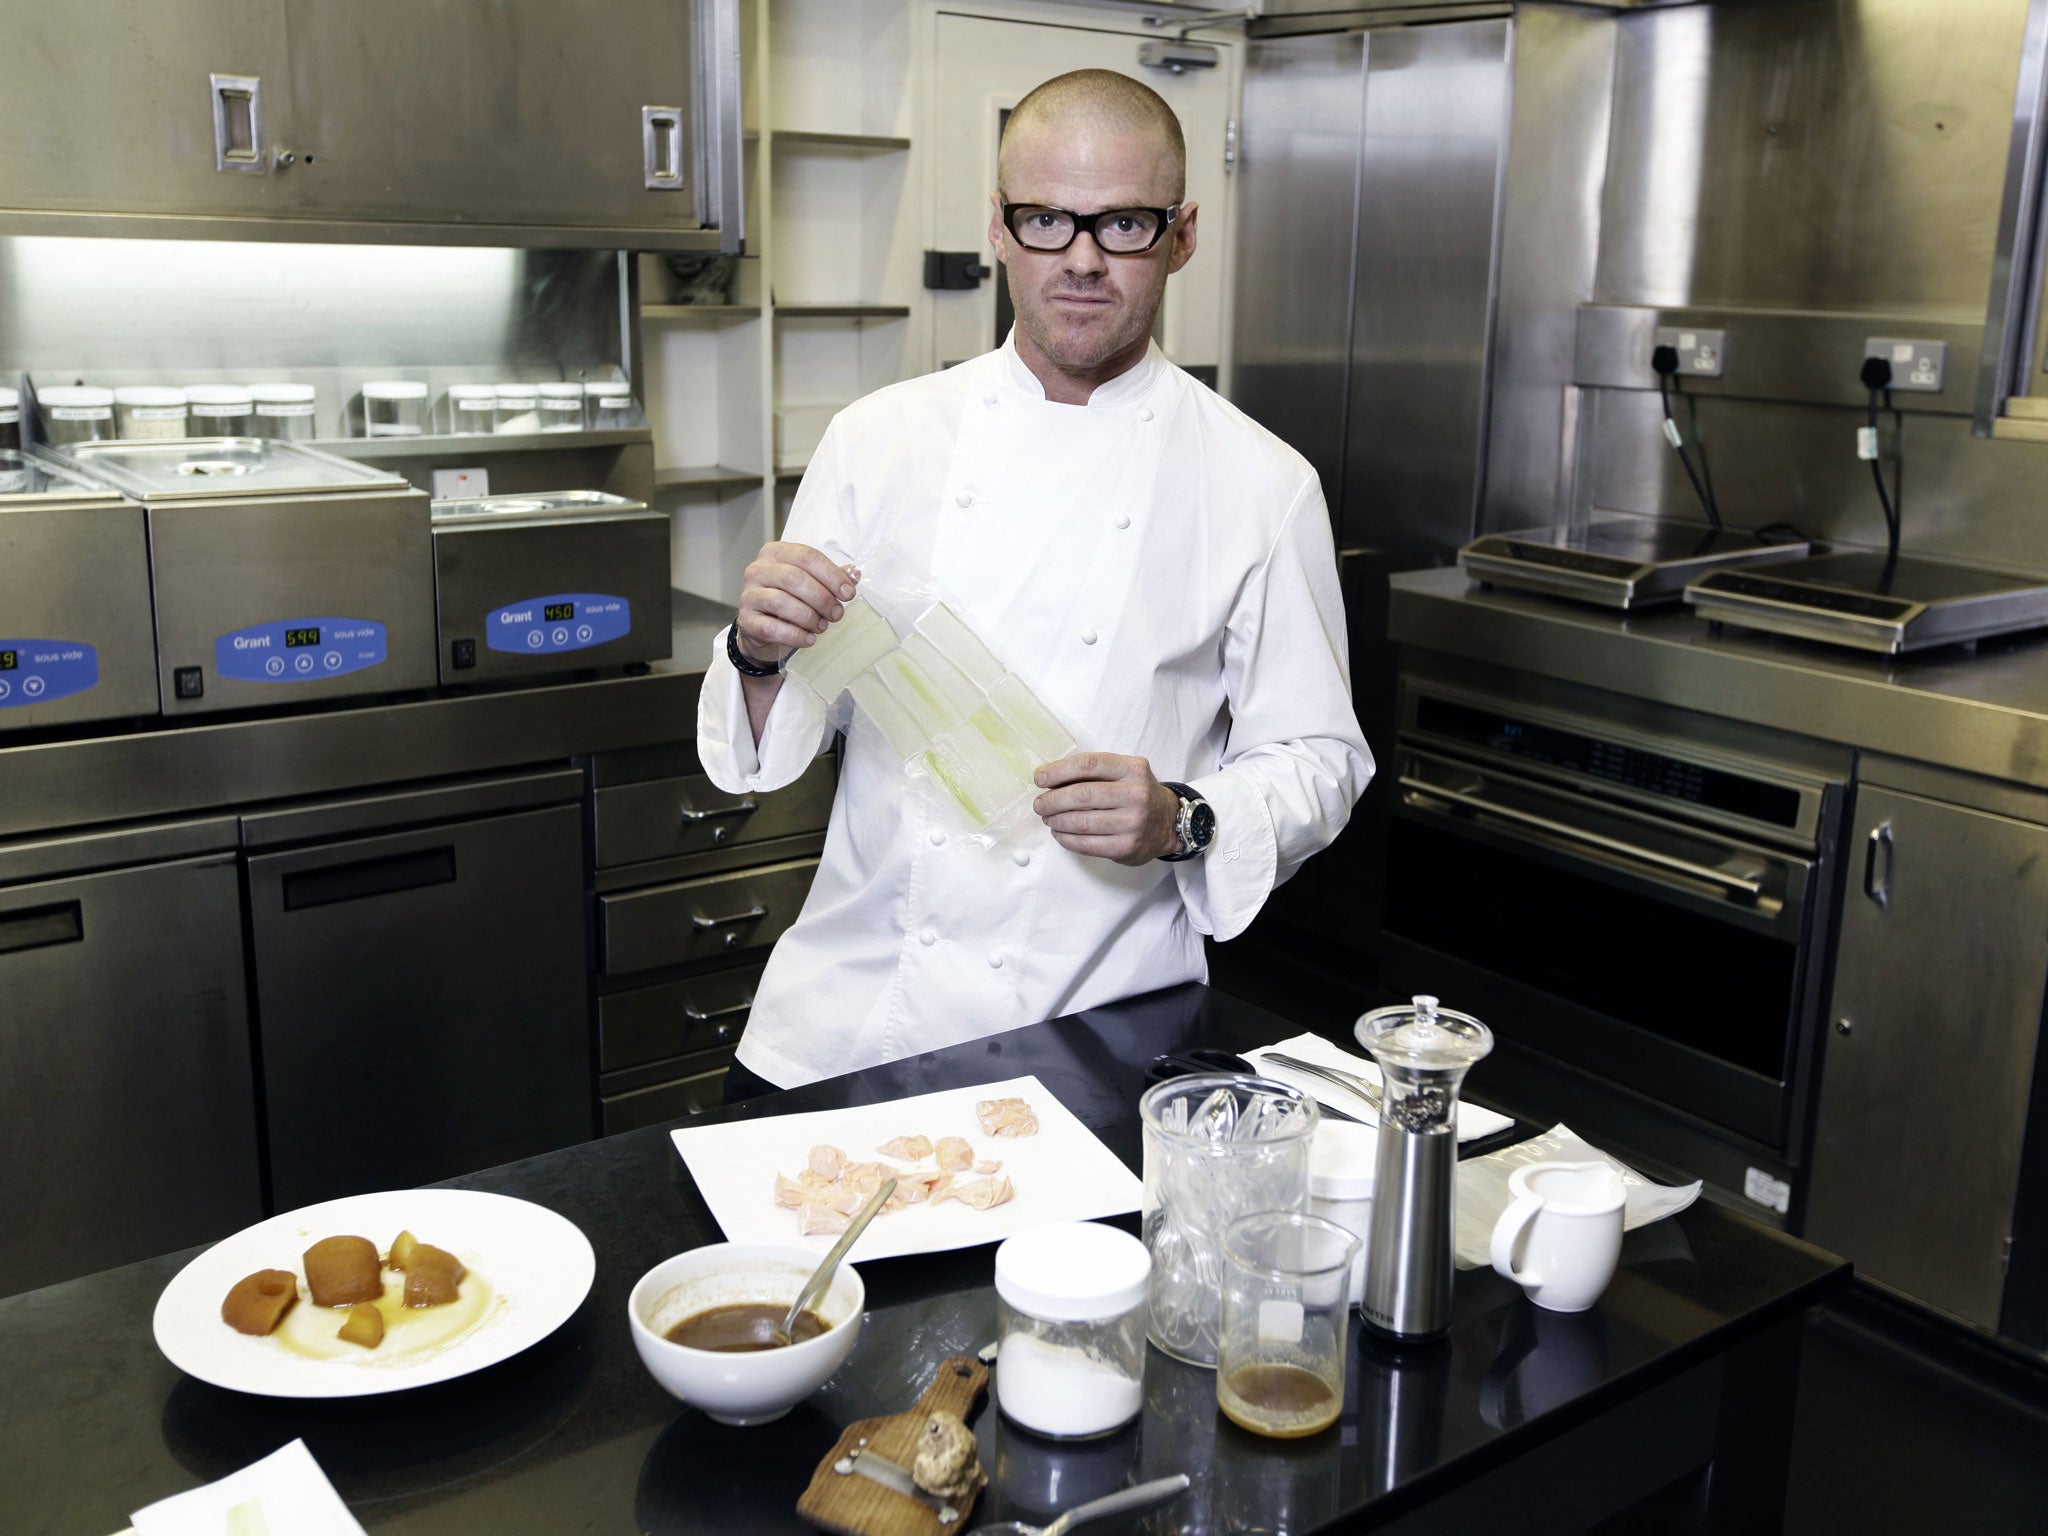 Heston Blumenthal has apologised to customers